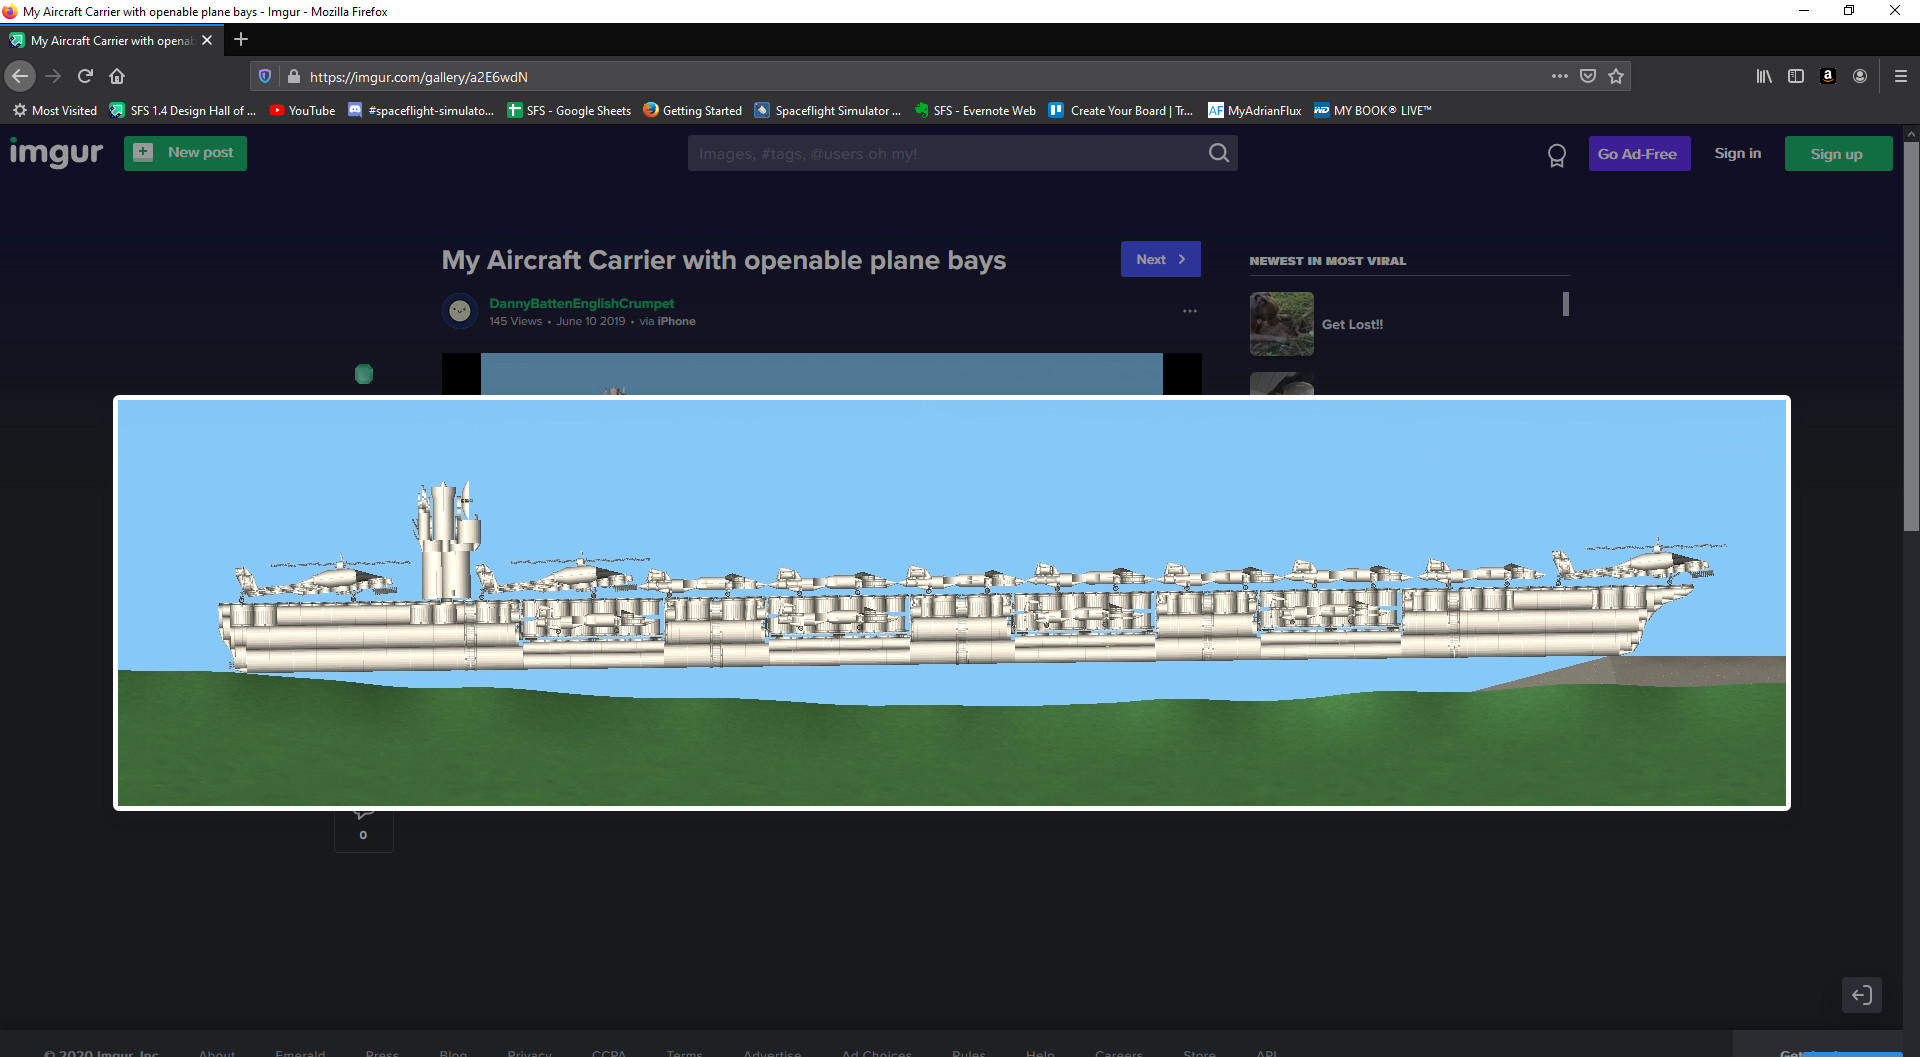 My Aircraft Carrier with openable plane bays - Imgur - Mozilla Firefox 10_09_2020 21_37_37.png